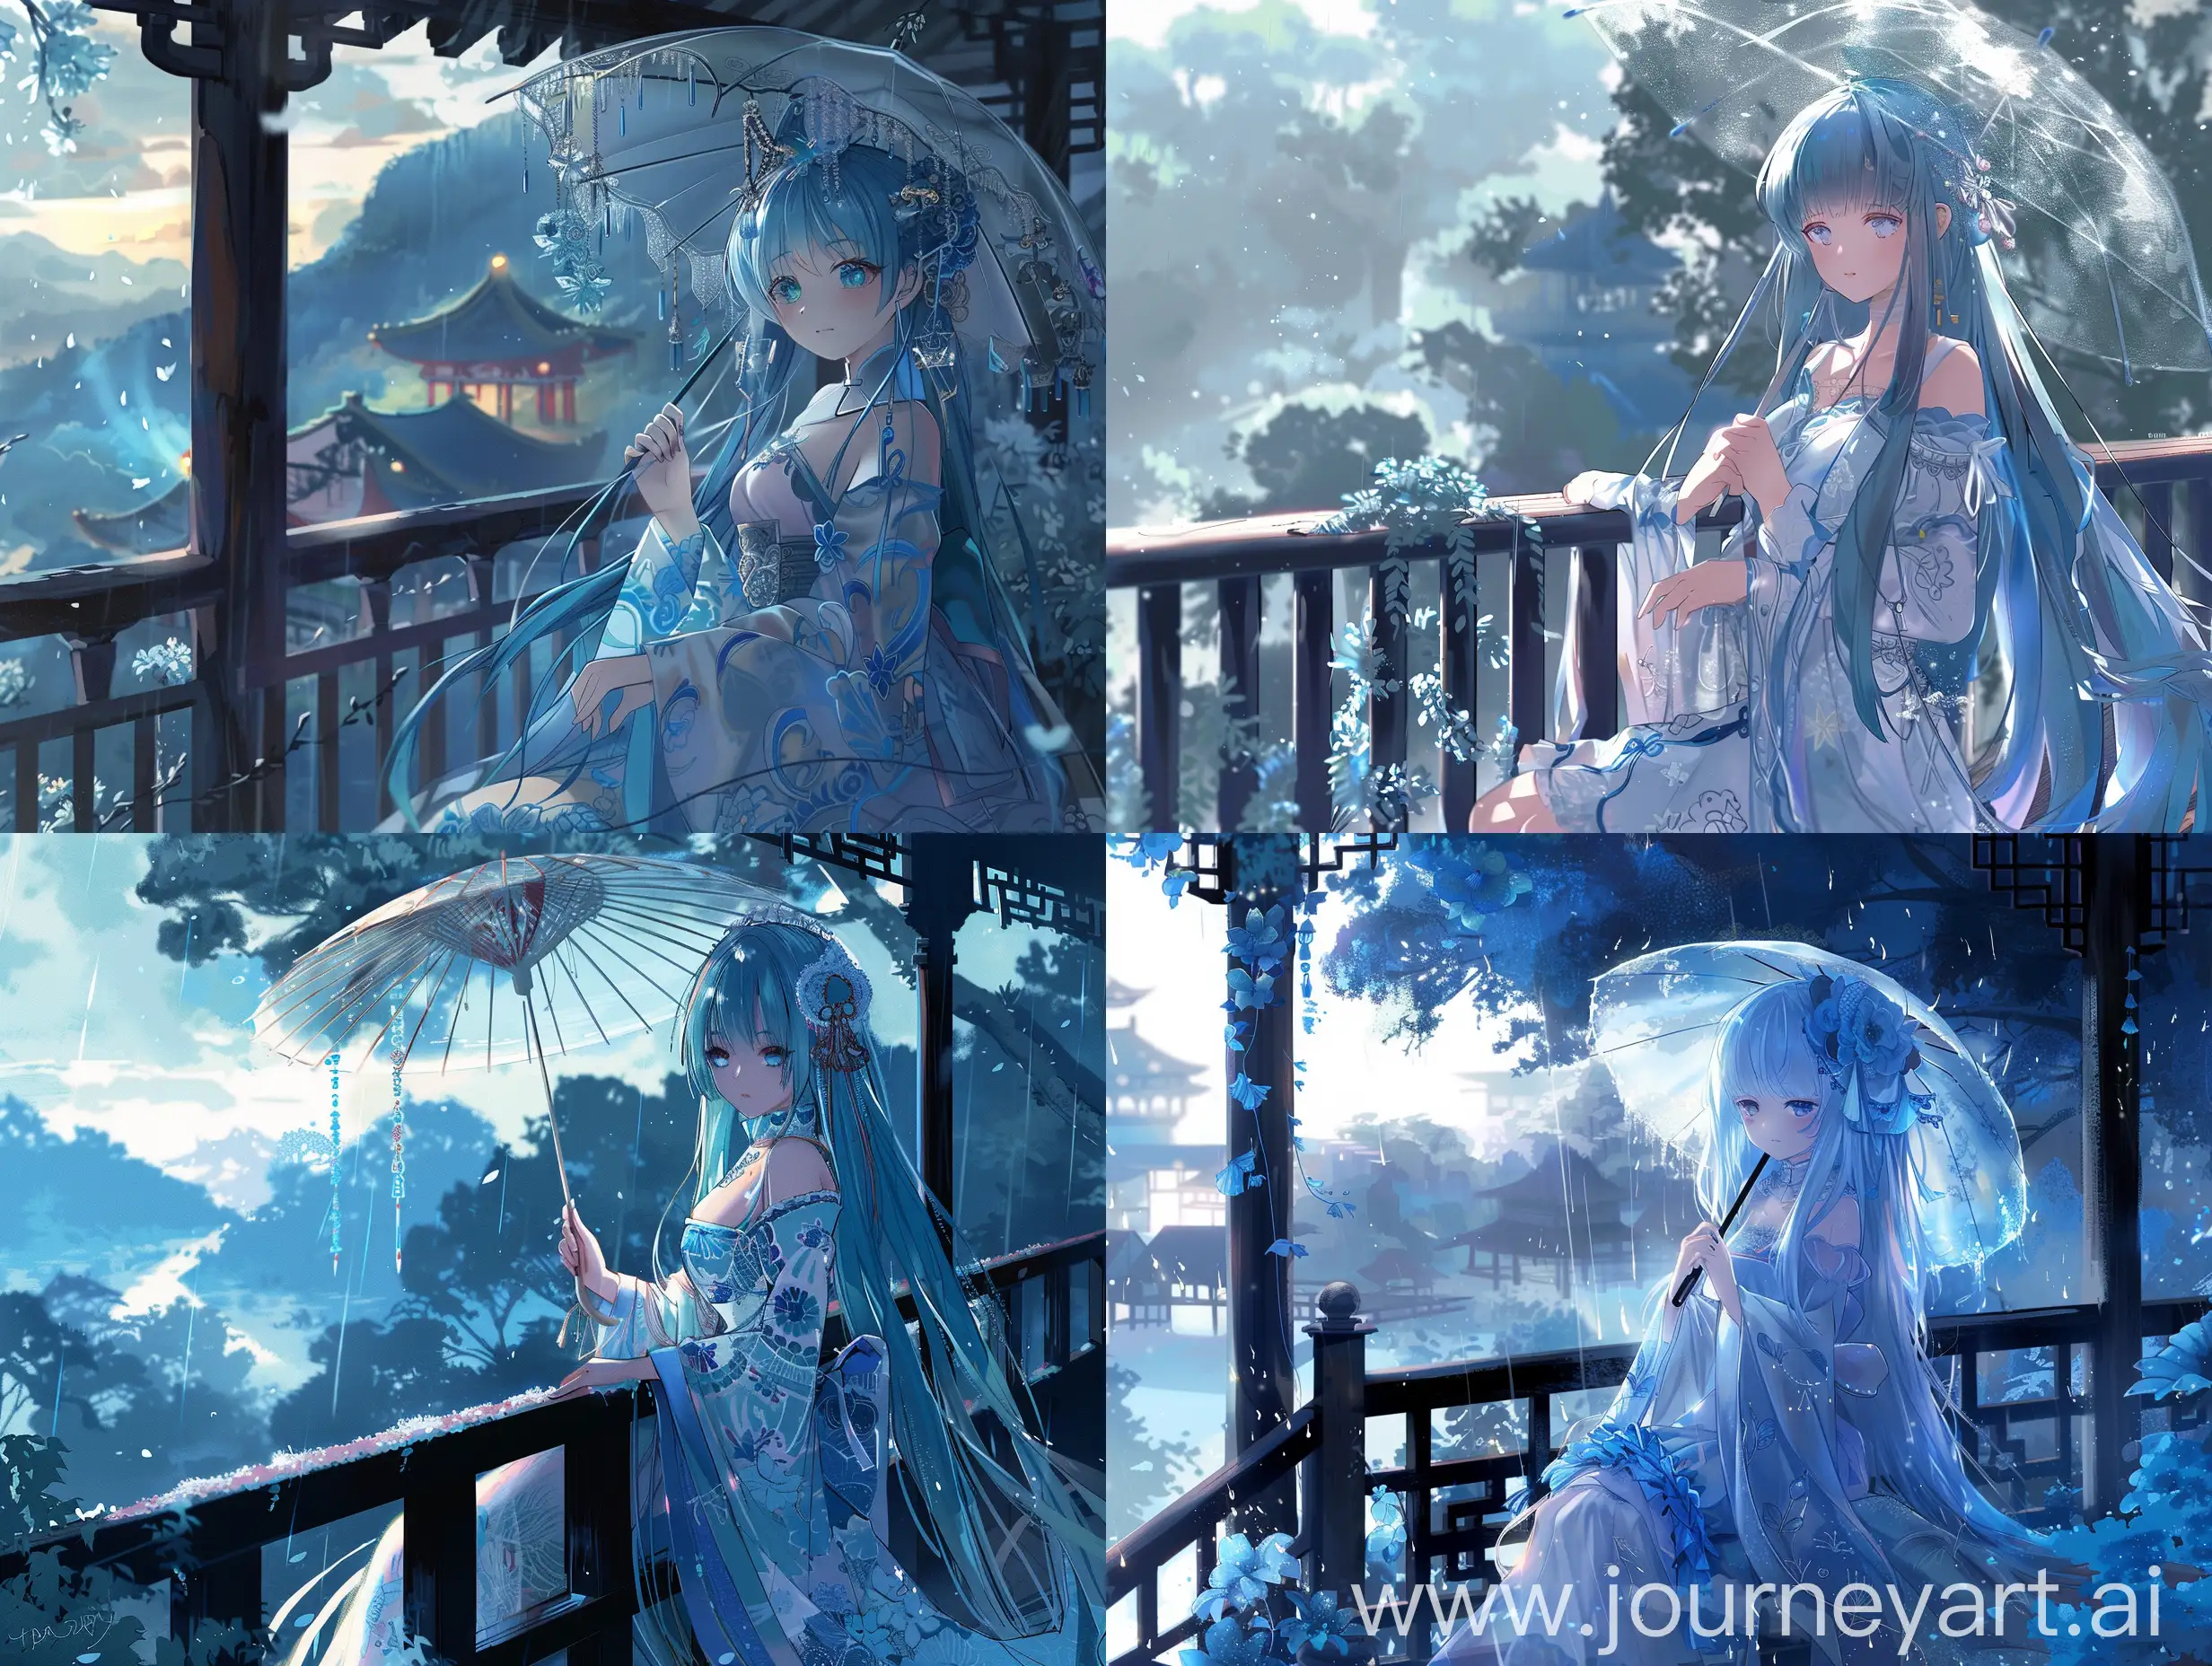 Light novel beautiful cover,Anime-style illustration of a girl with long blue hair and a beautiful cultural outfit, holding a transparent umbrella. She is sitting on a balcony with dark railings, surrounded by  beautiful scenery with soft blue hues or shade. The scene is serene and ethereal.